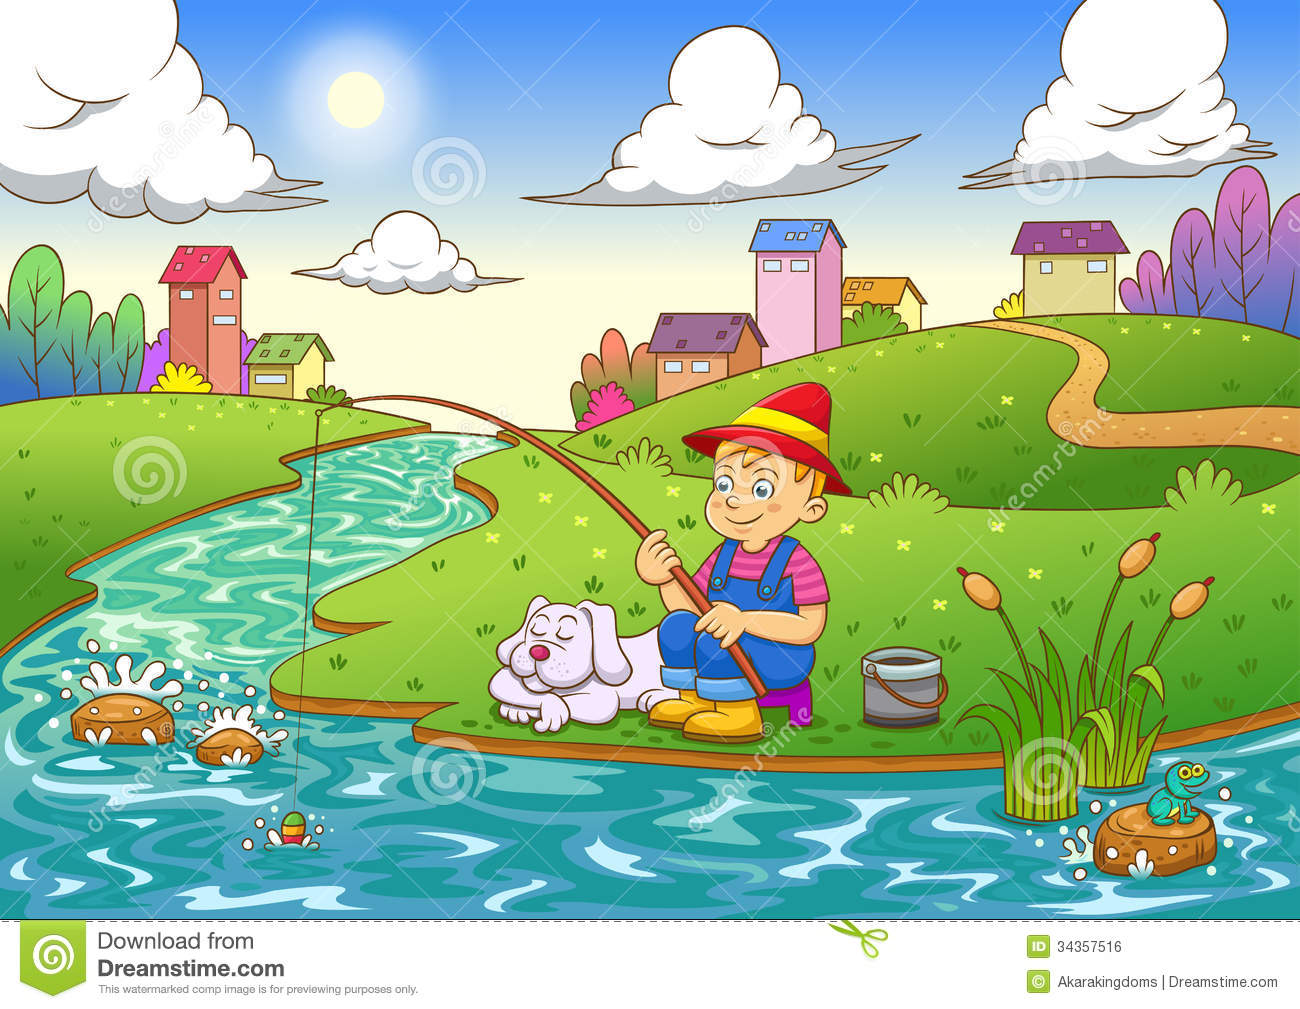 boy in pond fishing clipart - Clipground